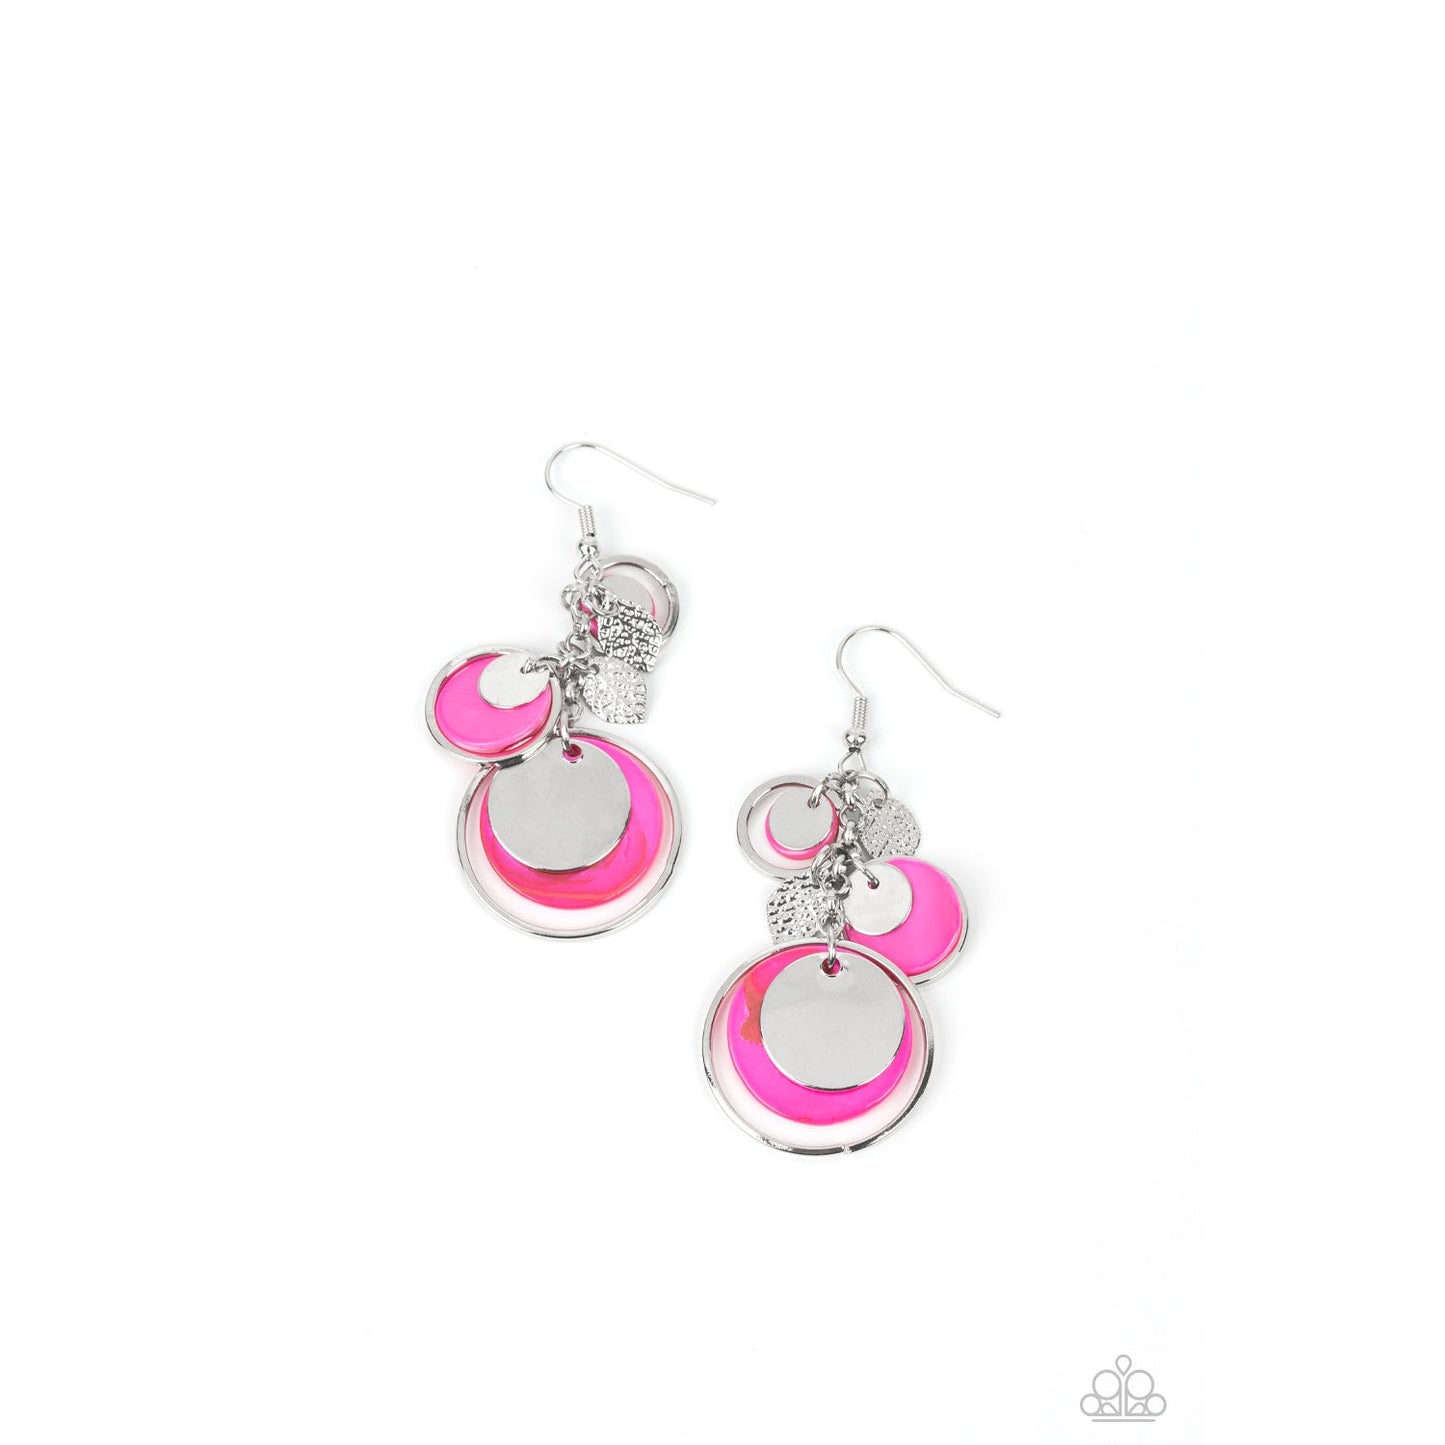 Saved by the SHELL - Pink Earrings - Bling by Danielle Baker